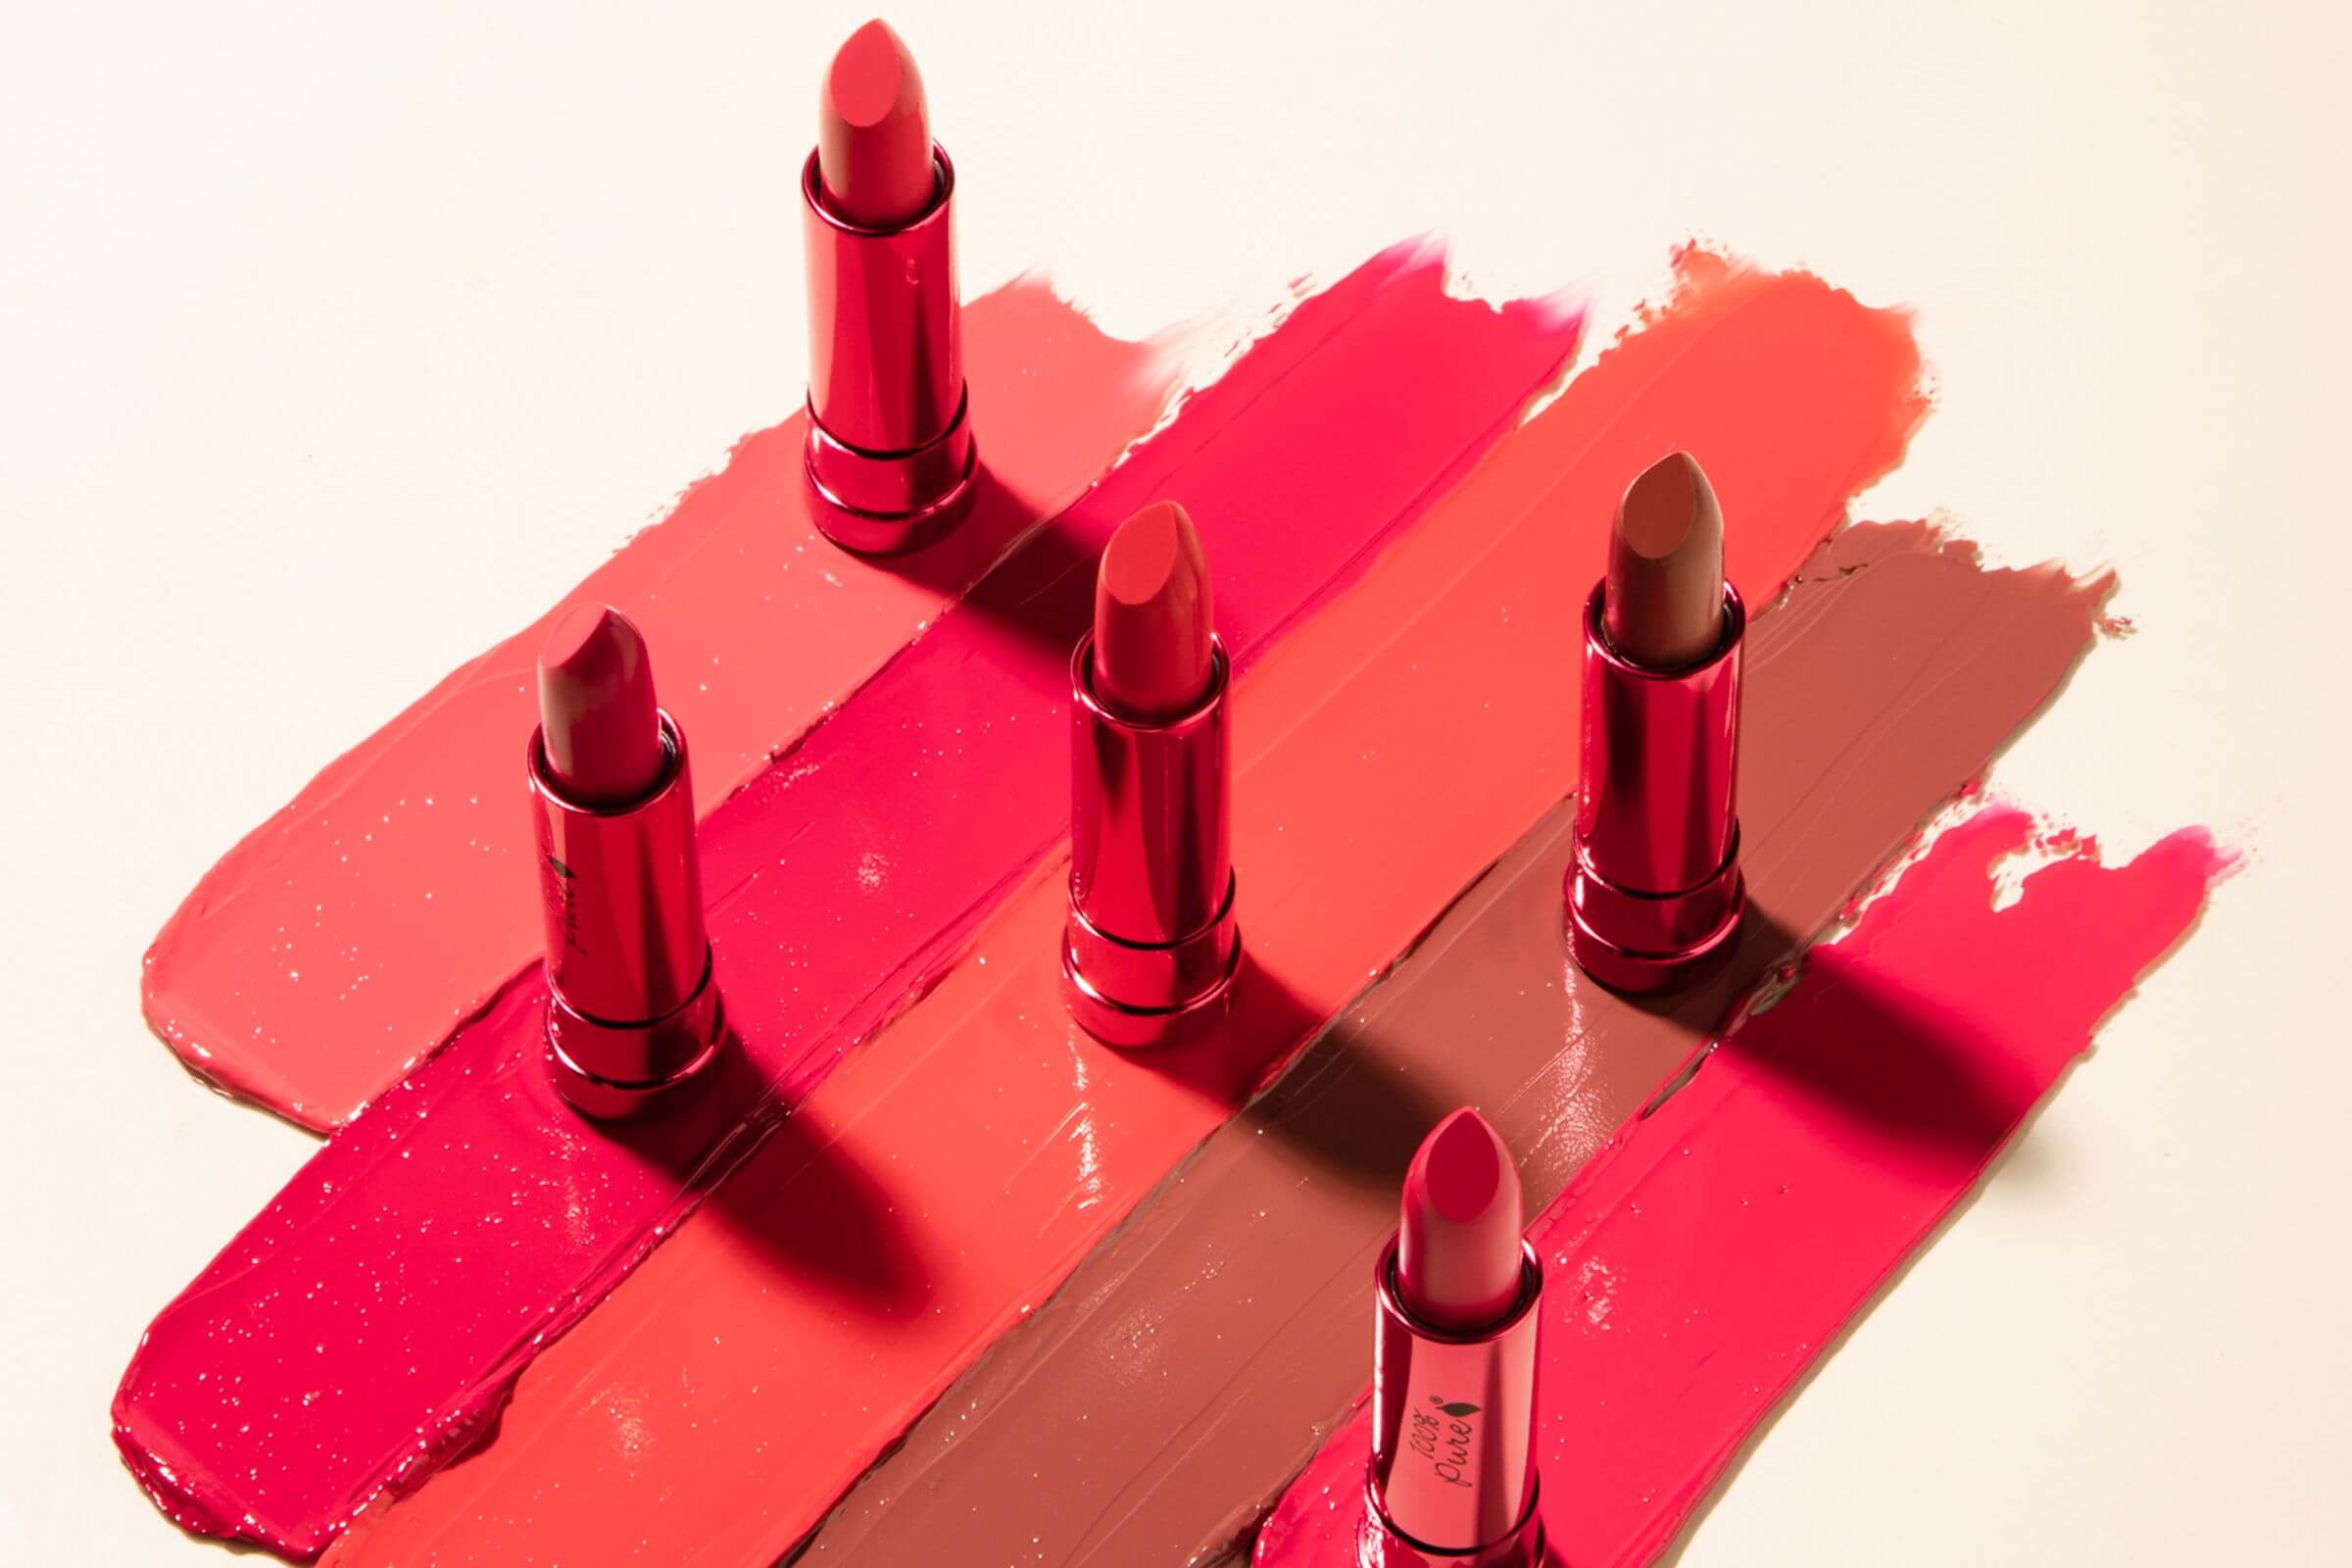 Cover Photo - 100_ Pure - How To Choose The Best Lipstick For Your Skintone.jpg